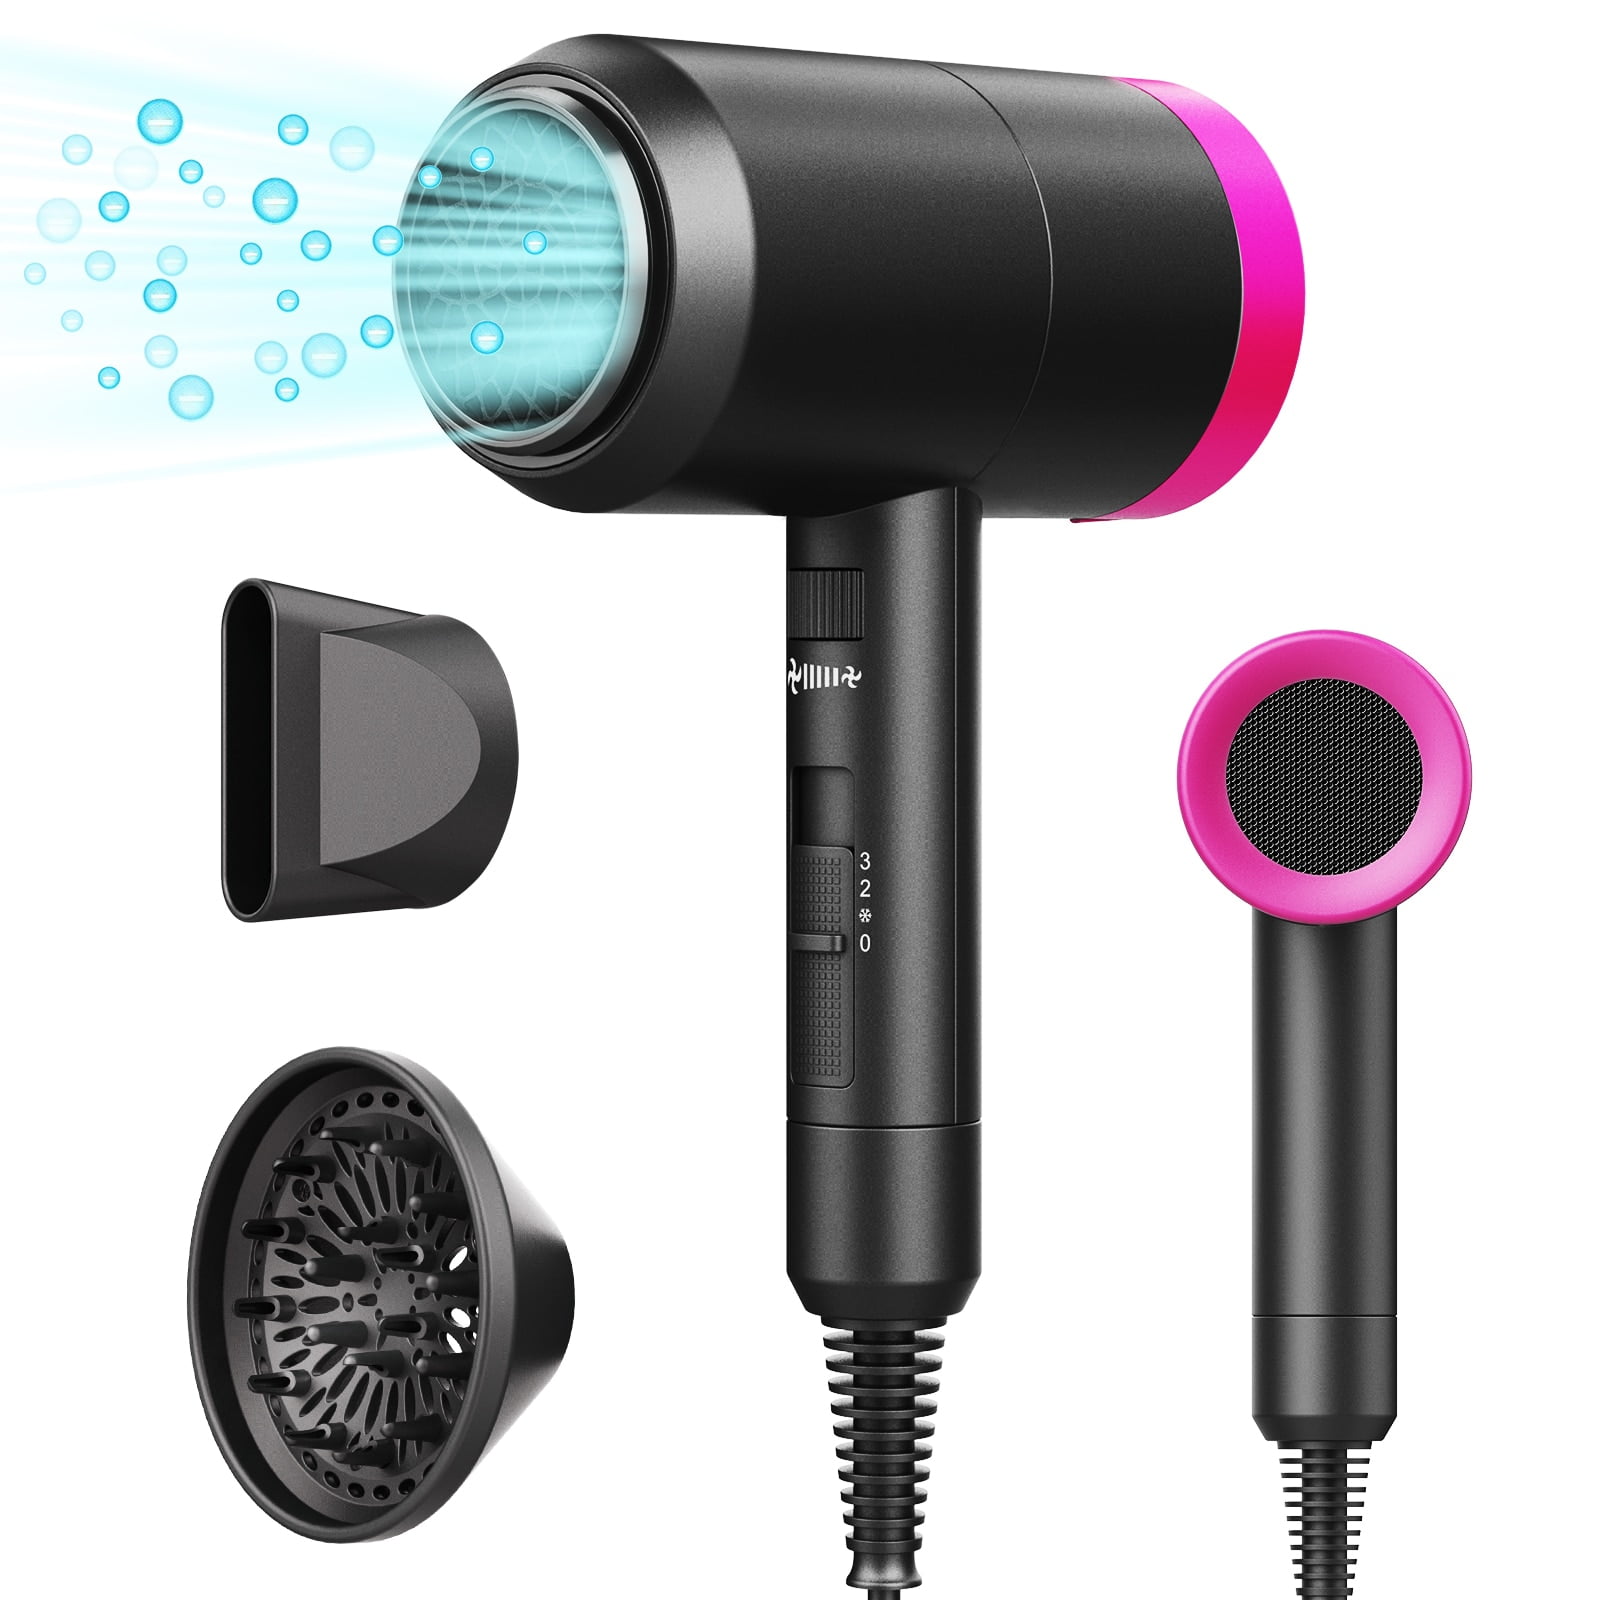 3 Heating and Cool Button Jooayou Professional Hair Dryer 2000W Fast Dry Negative Ions Hair Blow Temperature Hairdryer with Diffuser Hairdryer with 2 Speeds